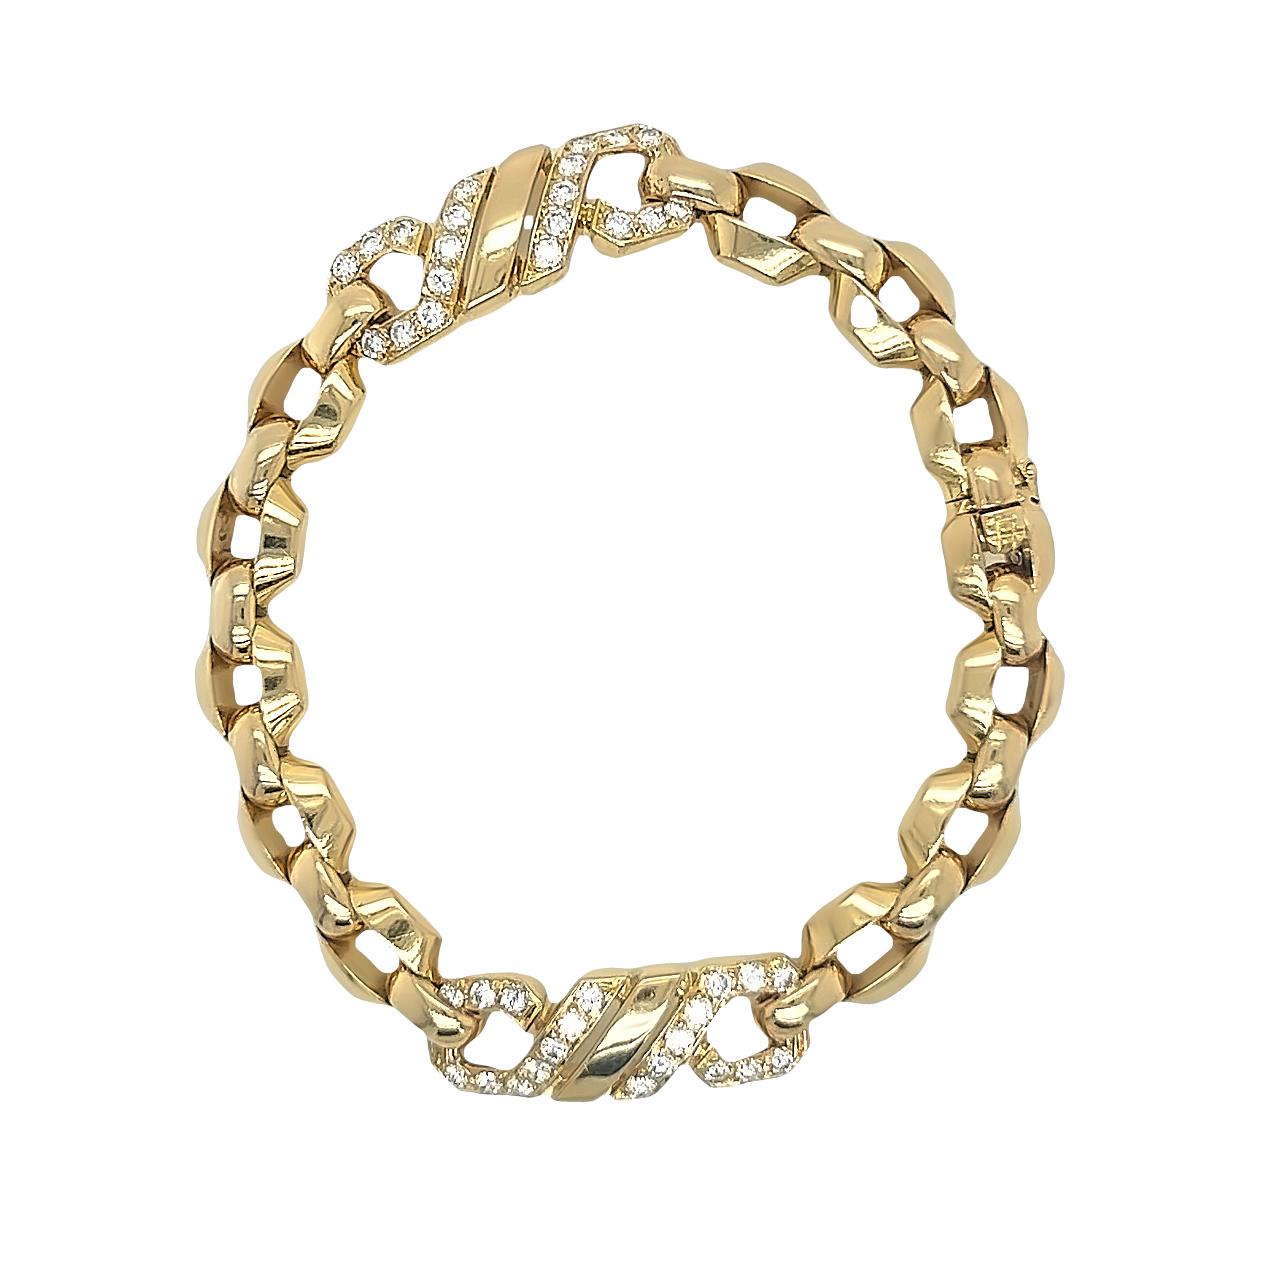 18k Yellow Gold Foxtrot Diamond Bracelet by Cartier Paris 1984 

This stylist piece never goes out of fashion, a real Cartier collectors piece for any deserving buyers.

Set with 40 round brilliant cut diamonds VVS1 clarity, E,F Colour total diamond